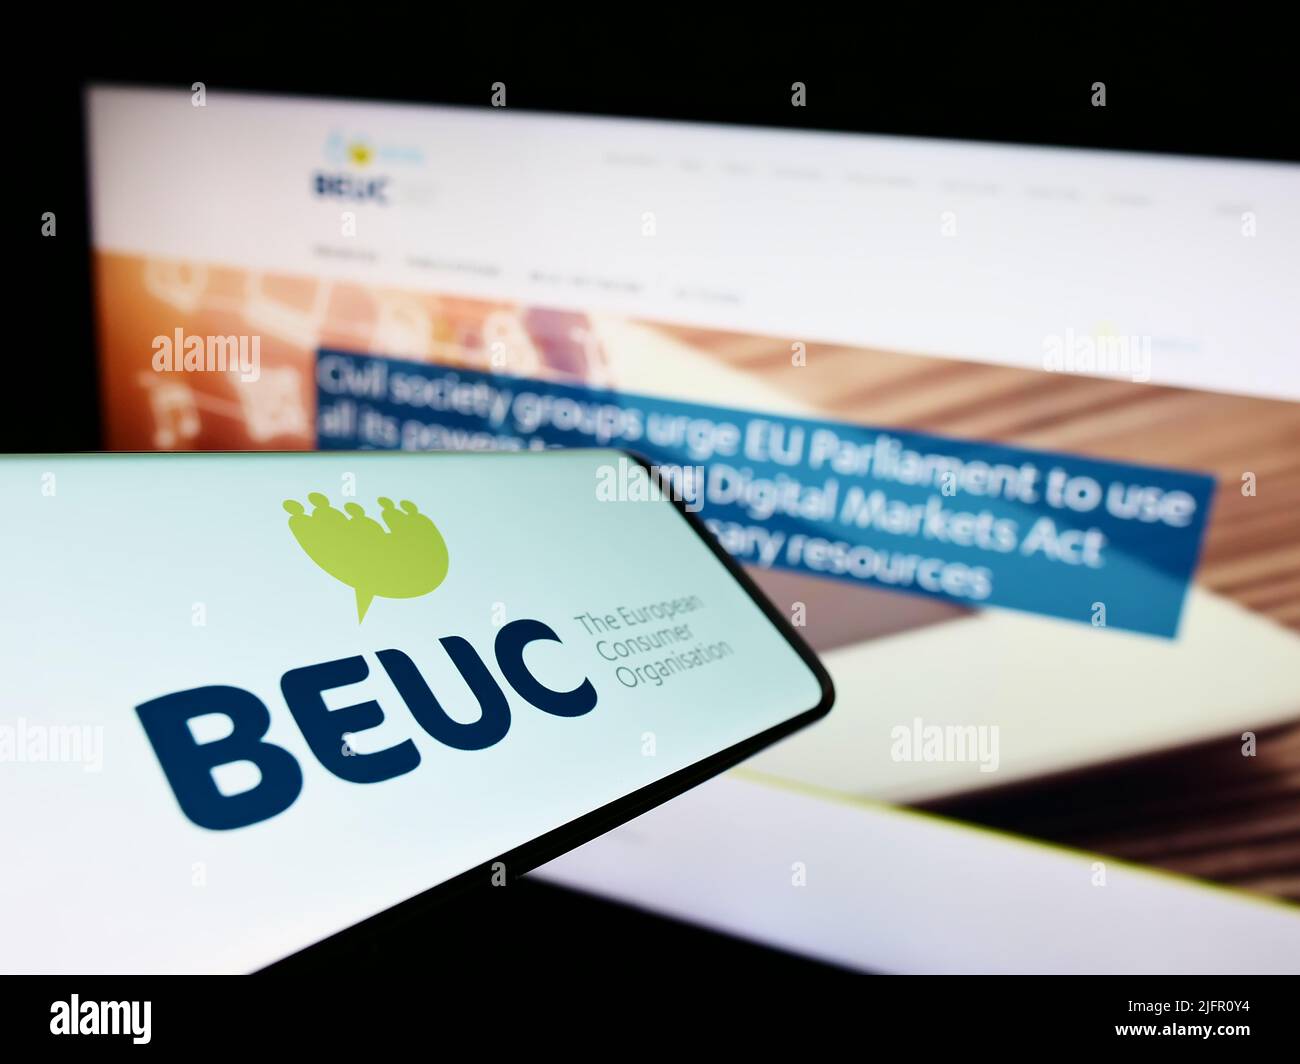 Smartphone with logo of Bureau Europeen des Unions de Consommateurs (BEUC) on screen in front of website. Focus on center-right of phone display. Stock Photo